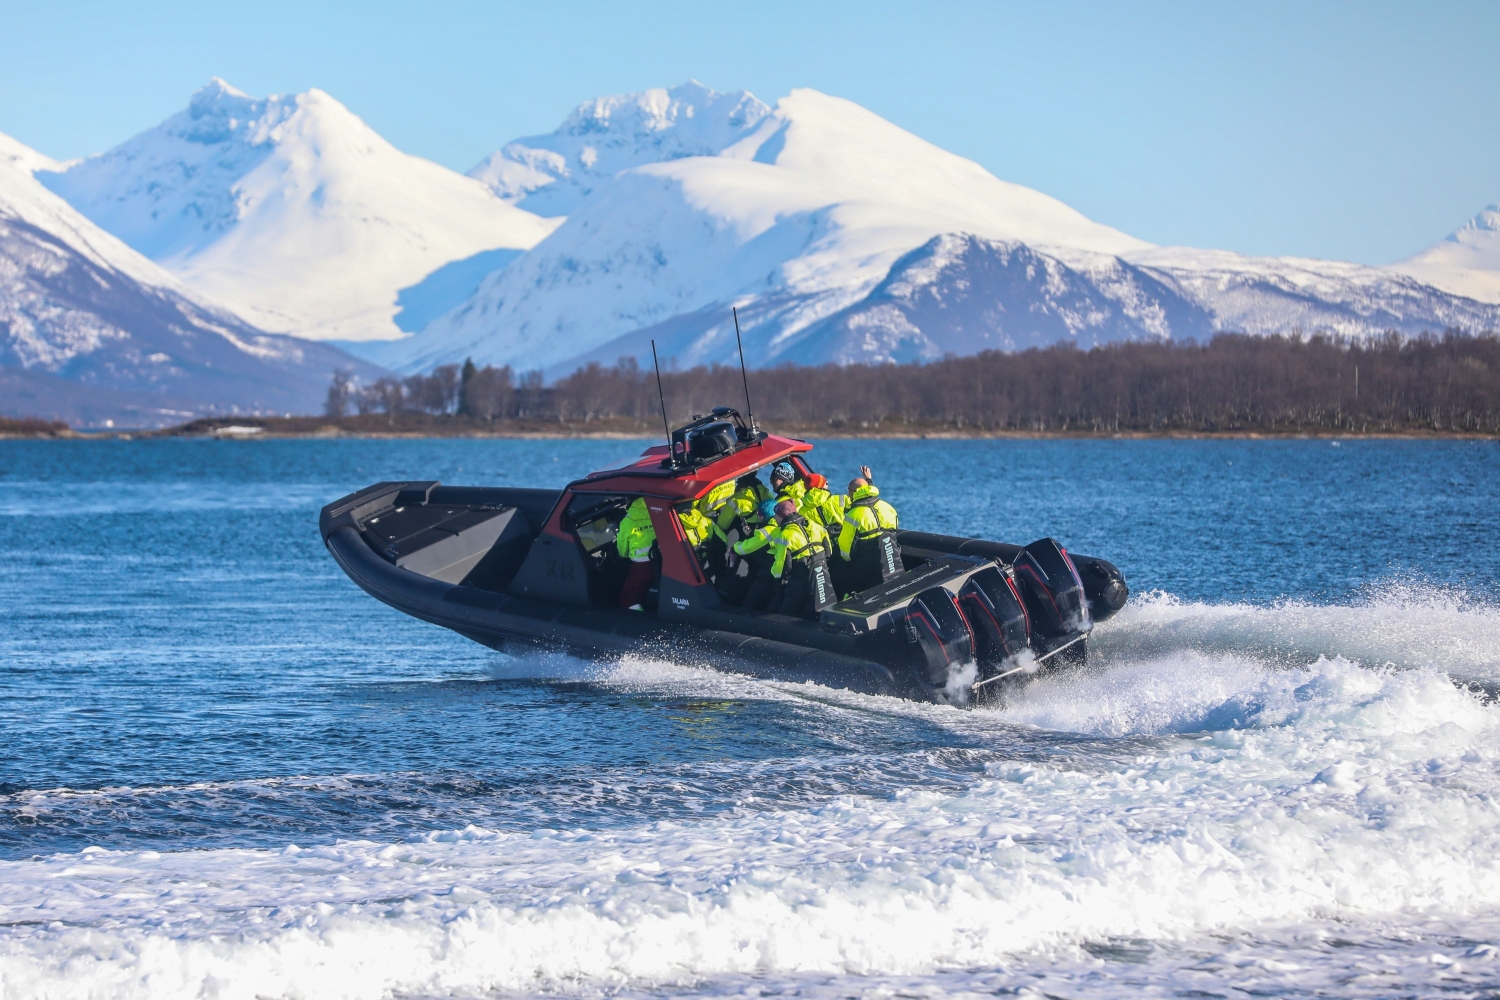 A RIB boat speeding on the water with snow covered mountains in the background